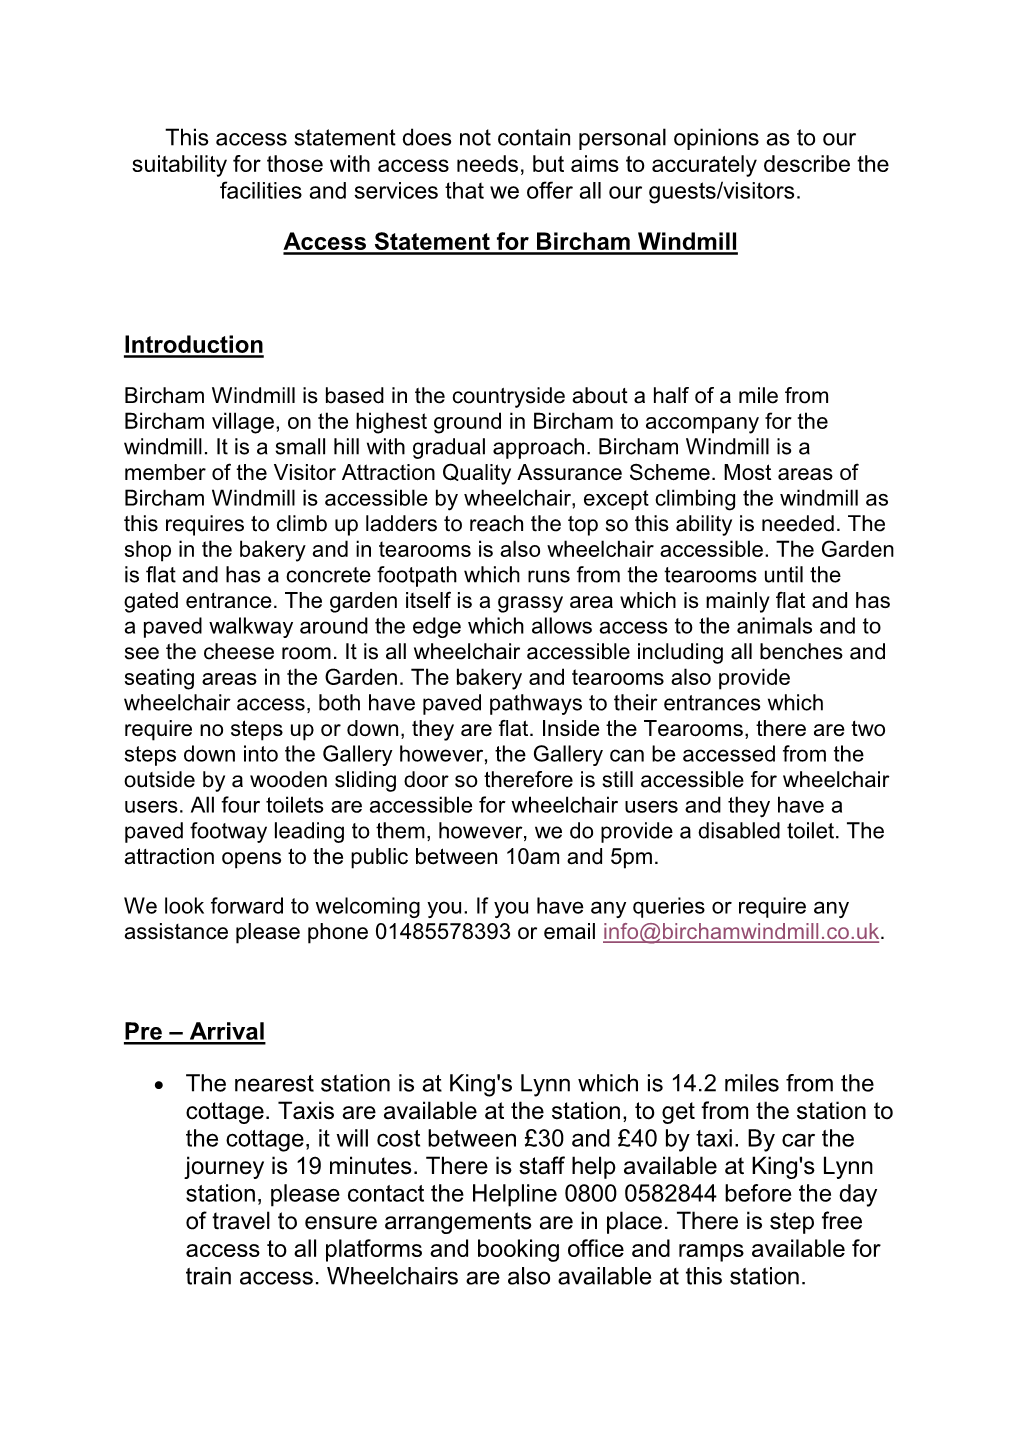 Access Statement for Bircham Windmill Introduction Pre – Arrival